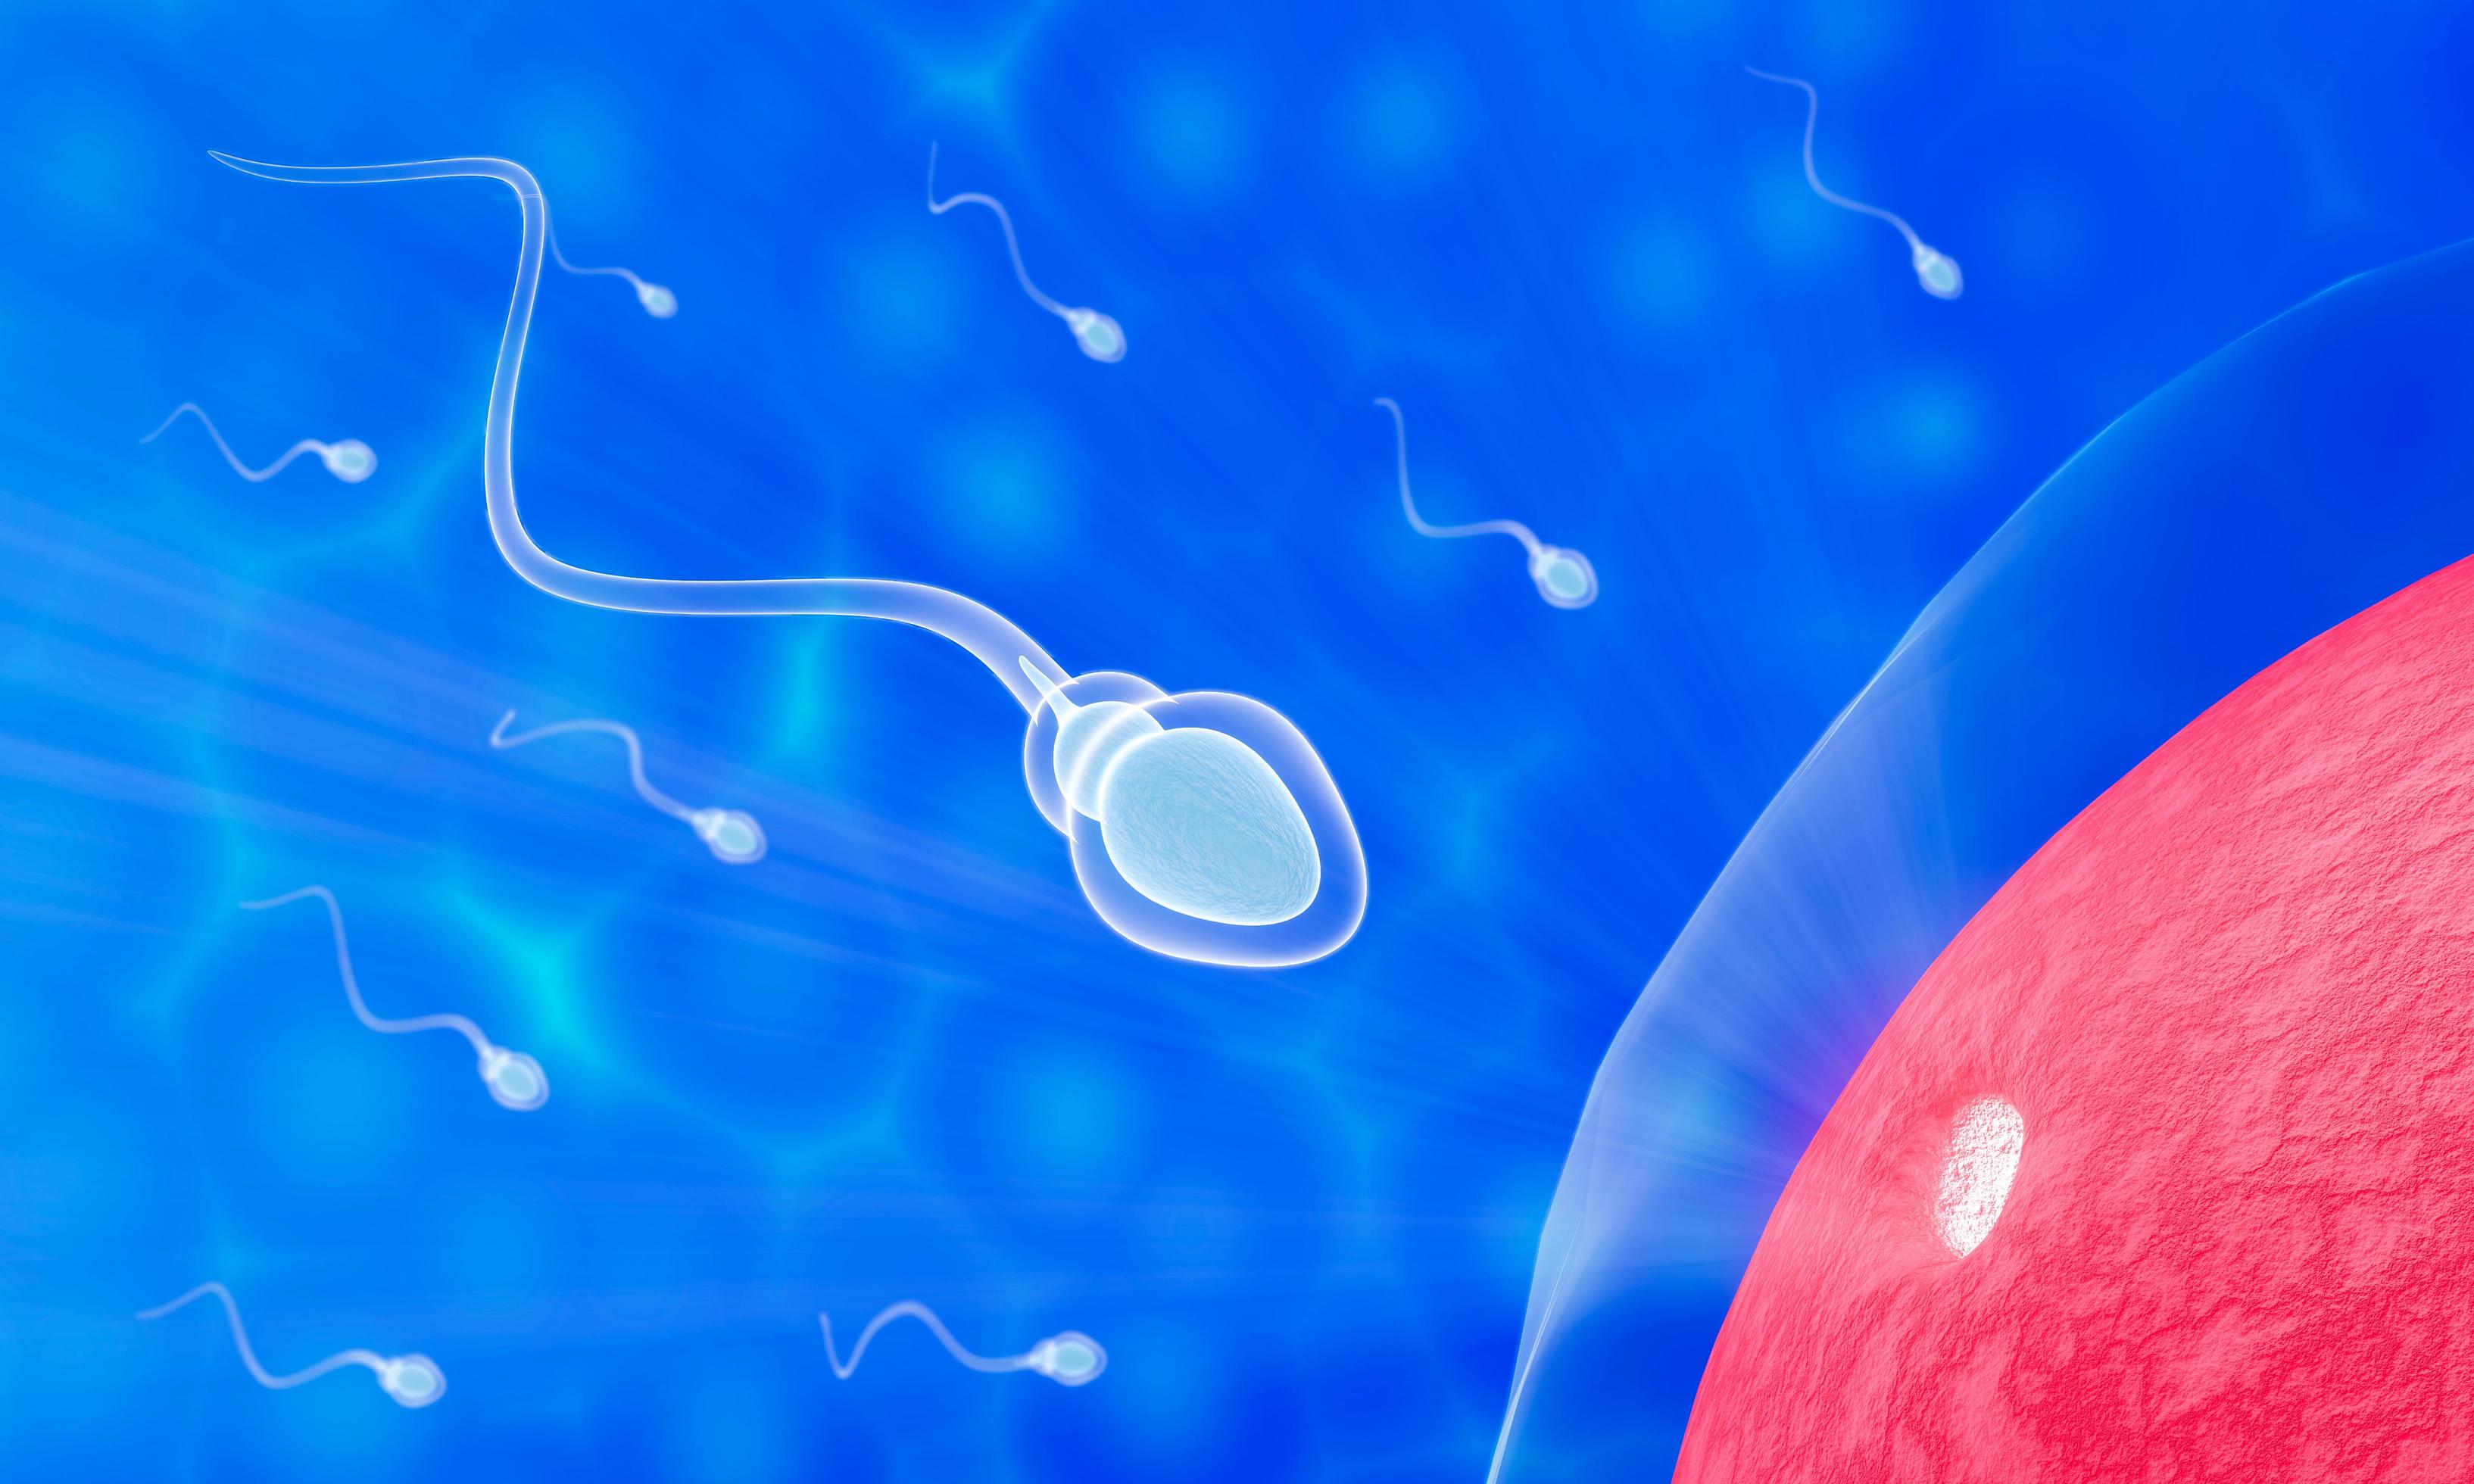 The sperm fertility from mens cum is directed towards the egg bubble after sex. To do human mating